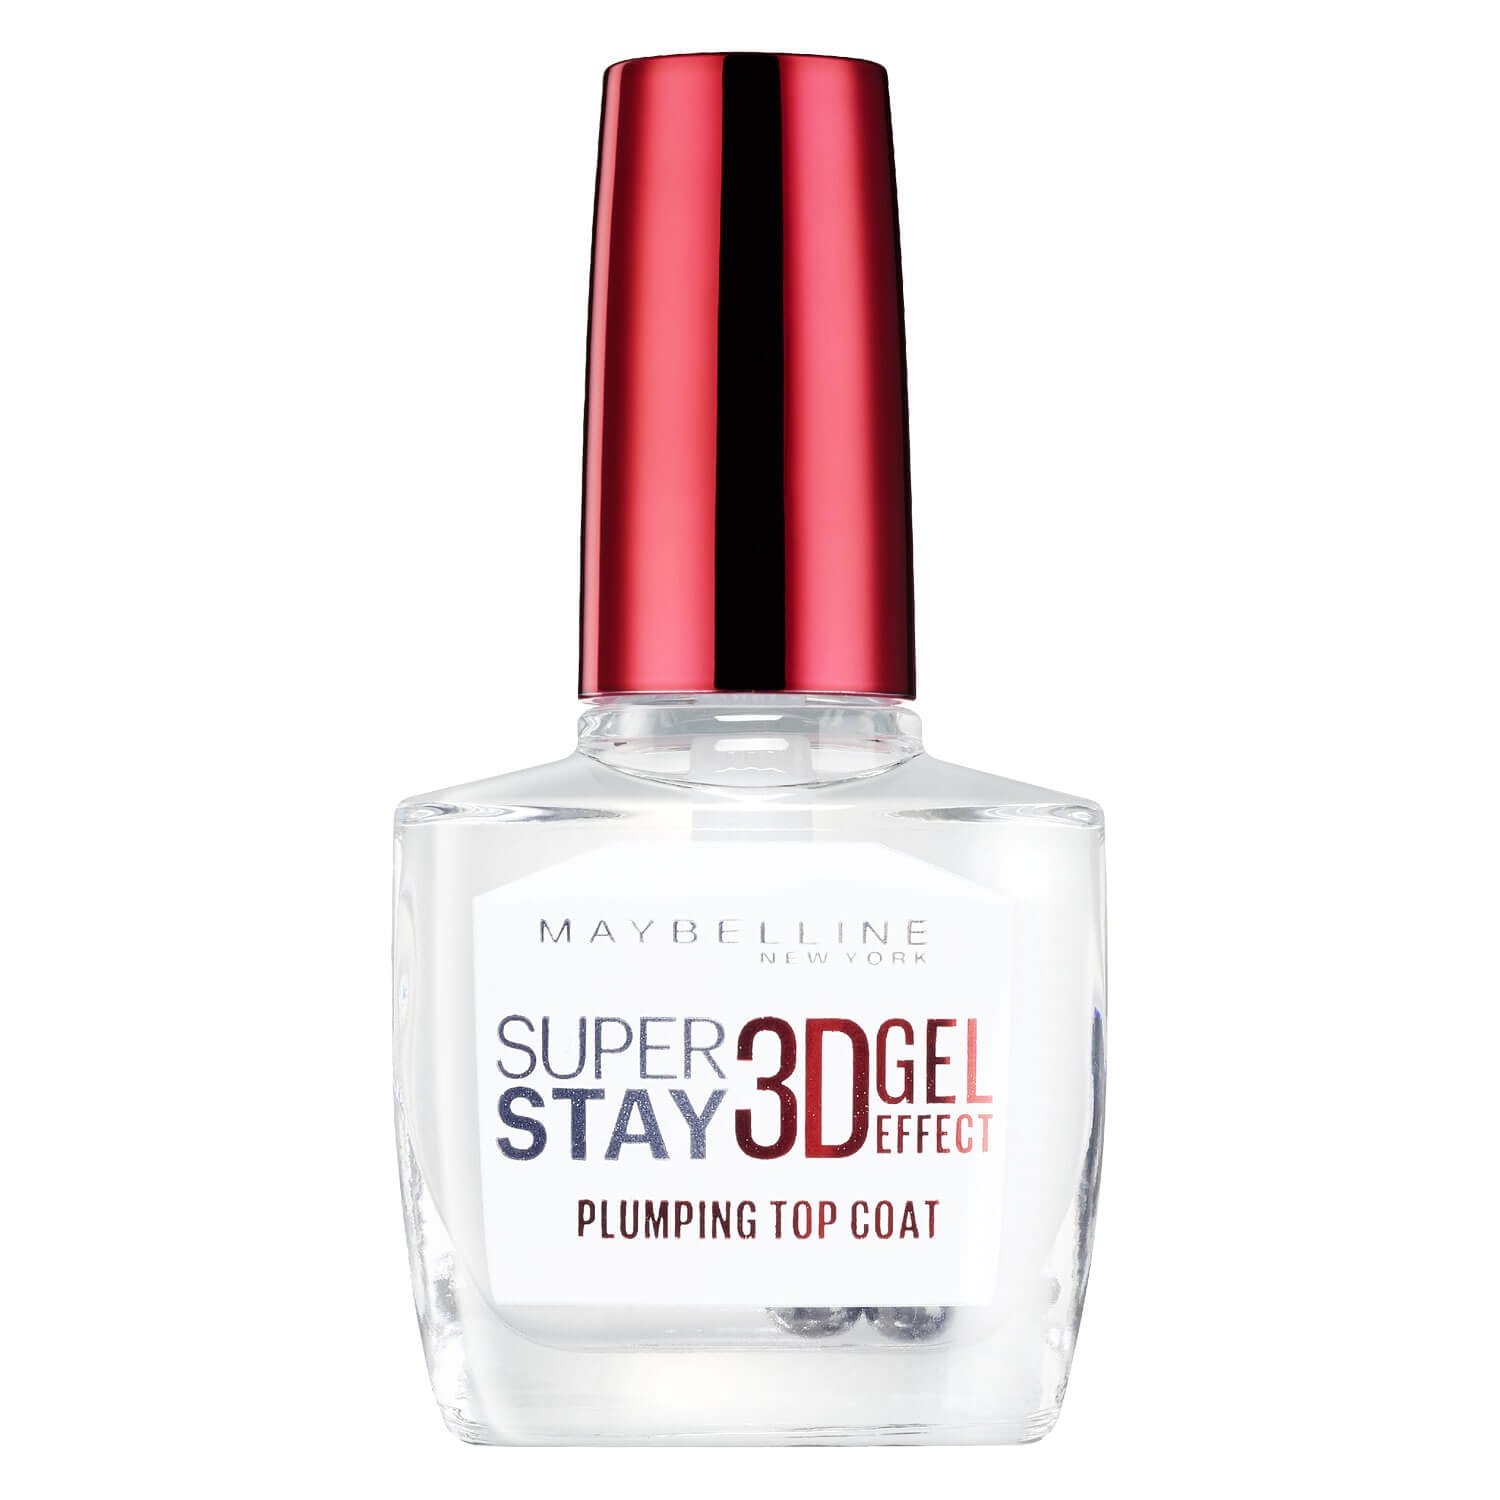 Produktbild von Maybelline NY Nails - Super Stay 3D Gel Effect Plumping Top Coat